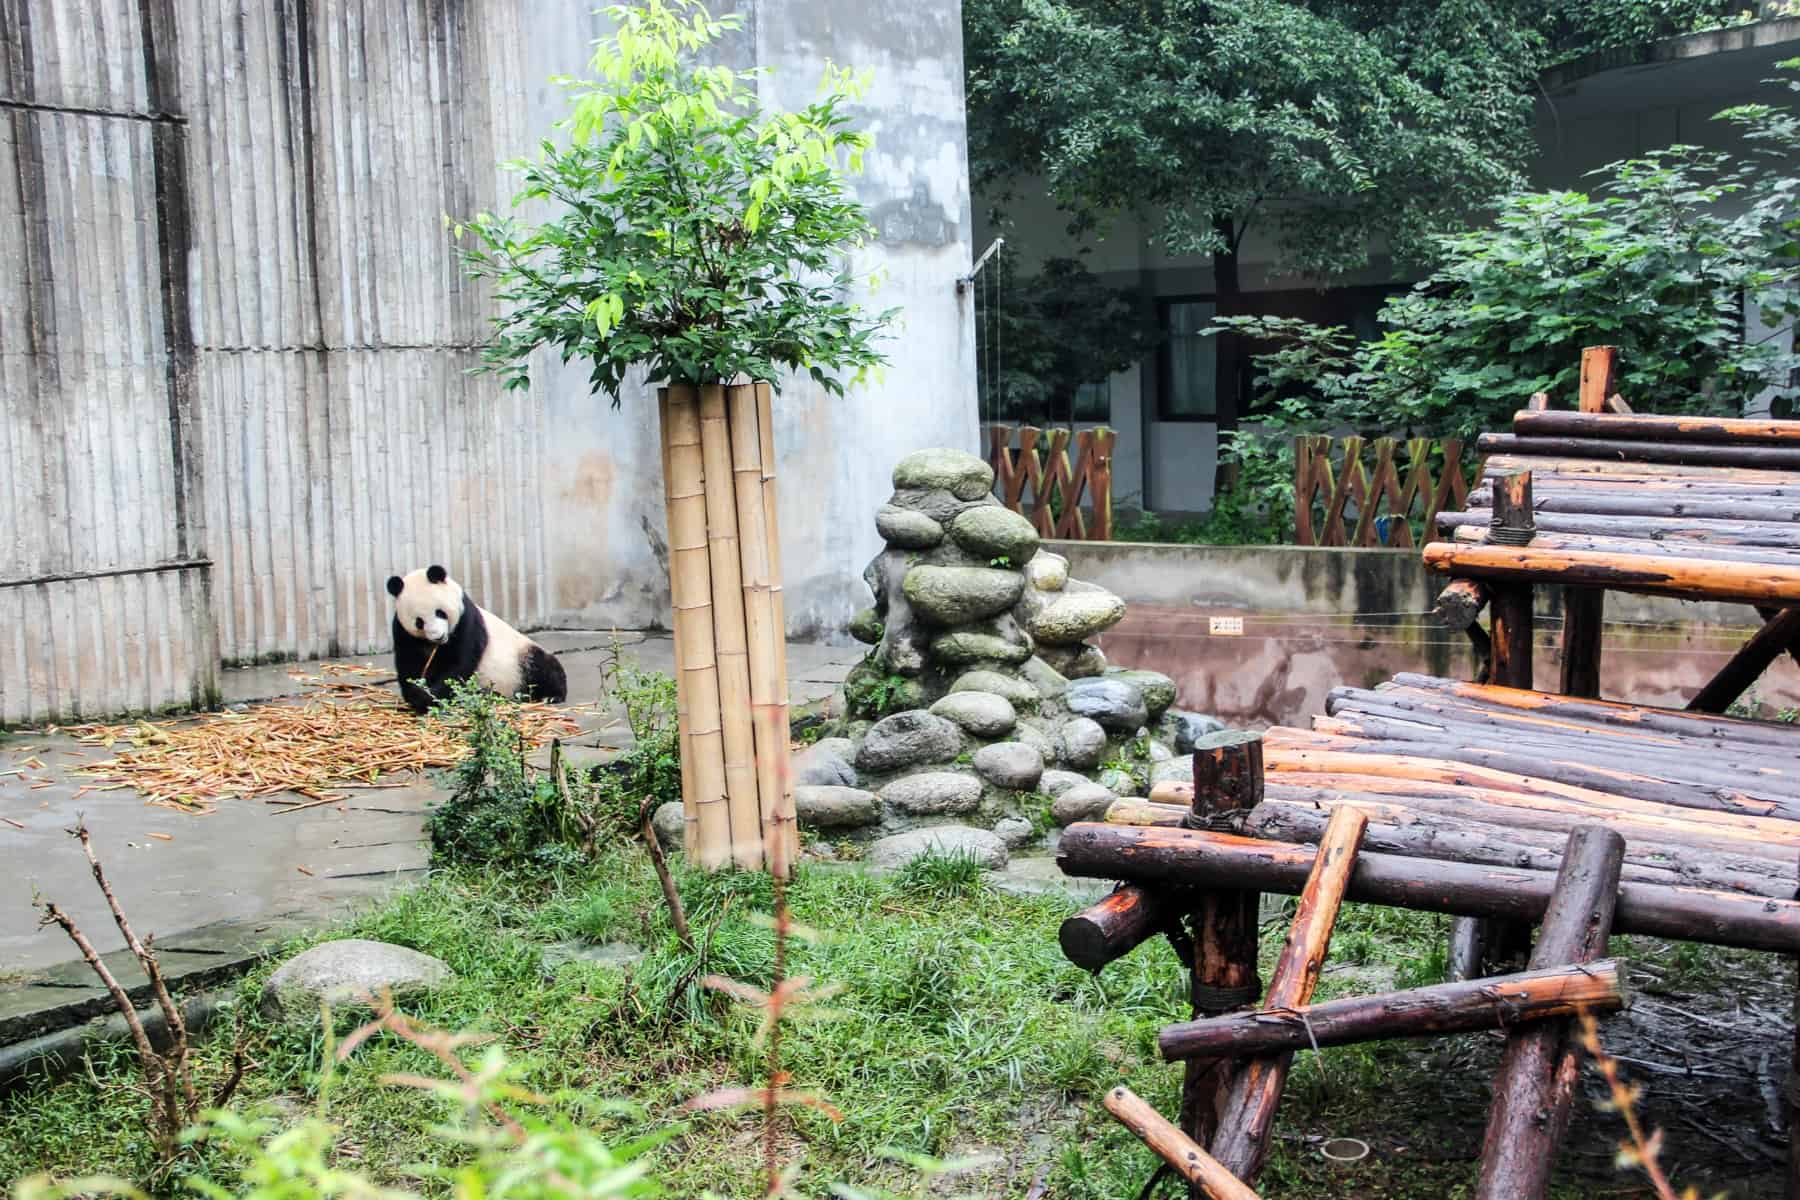 A Giant Panda lounging on a mat of bamboo plants in the open, green enclosure at the Breeding Base in Chengdu, China